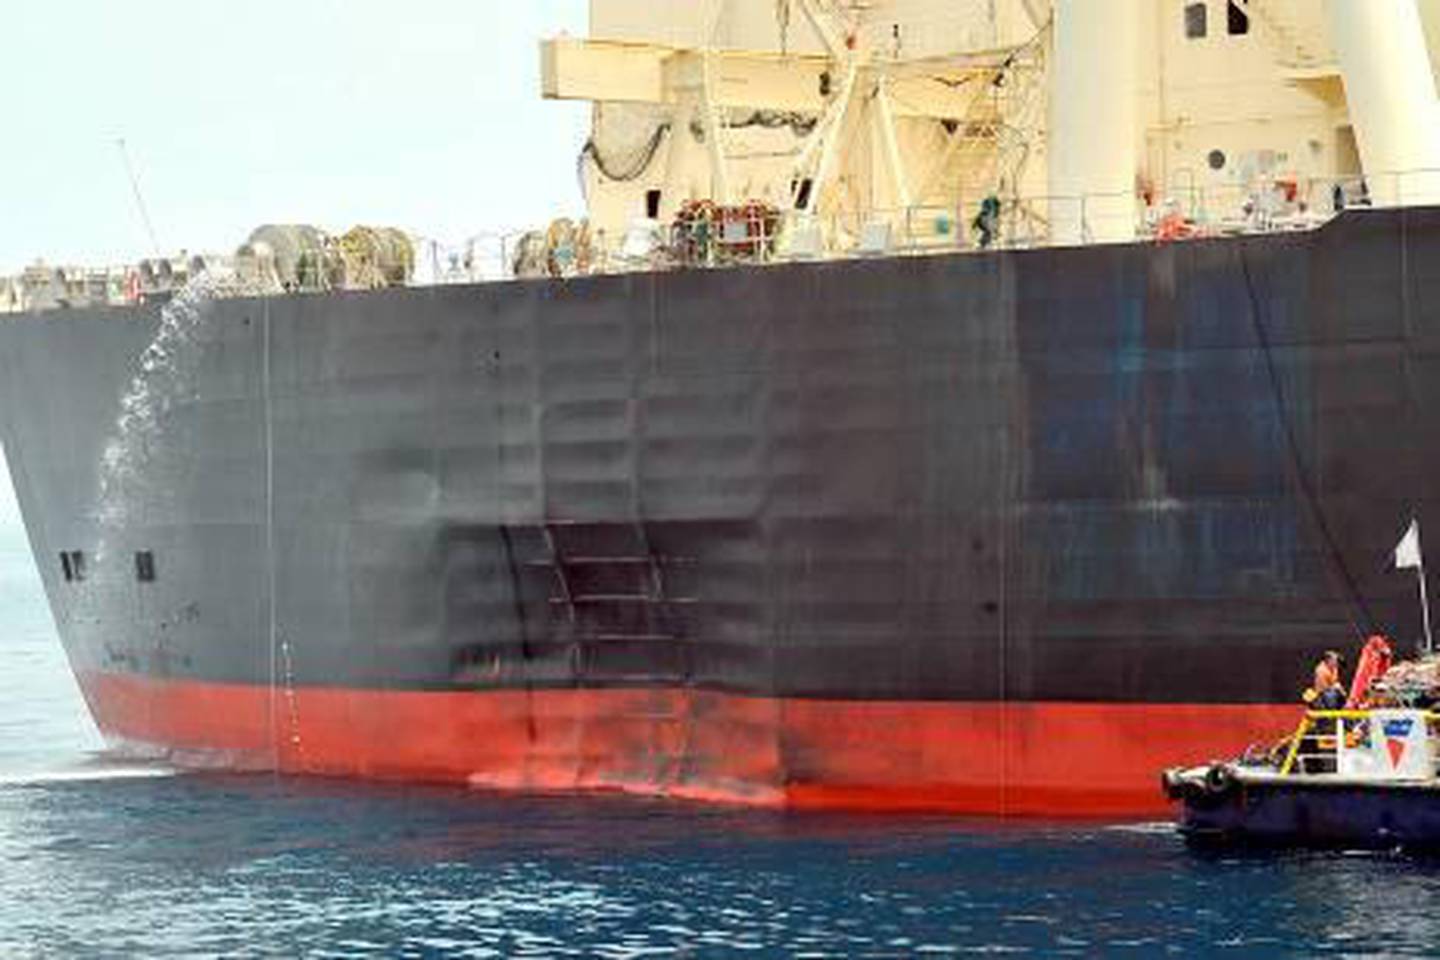 (FILES) -- A handout picture from the Emirati News Agency (WAM) released July 29, 2010 shows the Japanese oil tanker M Star of the Mitsui OSK Lines as it arrives at the Emirati port of Fujairah on July 28, 2010 after a mysterious explosion hit the tanker in the vital Strait of Hormuz. A "terrorist act" caused damage to a Japanese oil tanker in the Strait of Hormuz earlier this week, the coastguard in the United Arab Emirates, where the ship docked for repairs, said on August 6, 2010.  AFP PHOTO/HO/WAM  == RESTRICTED TO EDITORIAL USE == *** Local Caption ***  142963-01-08.jpg